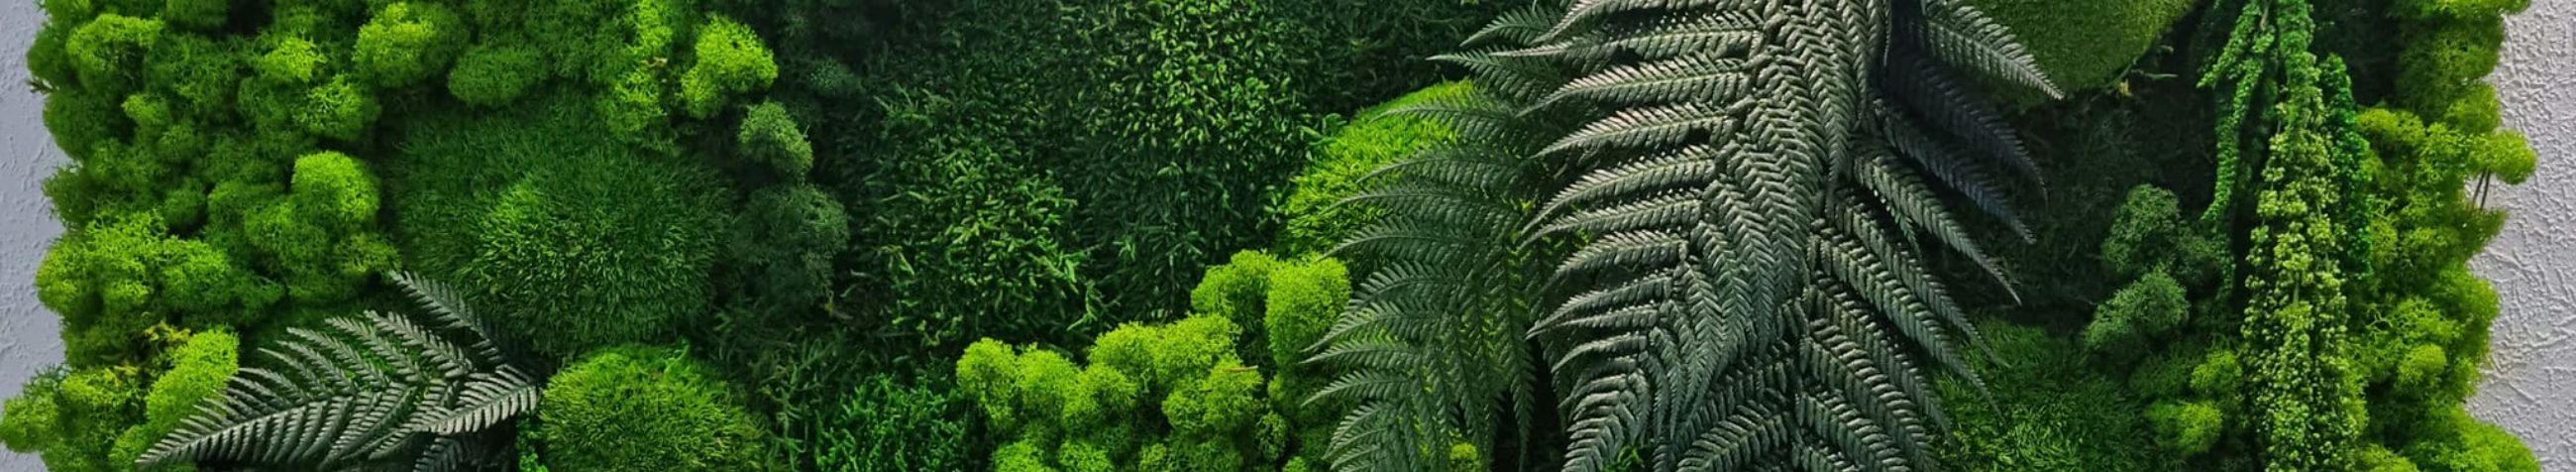 moss walls, automated watering, phytosein, additional lights, watering system, mini plant wall, live plants, automatic watering system, sewerage and water supplies, partitions with plants